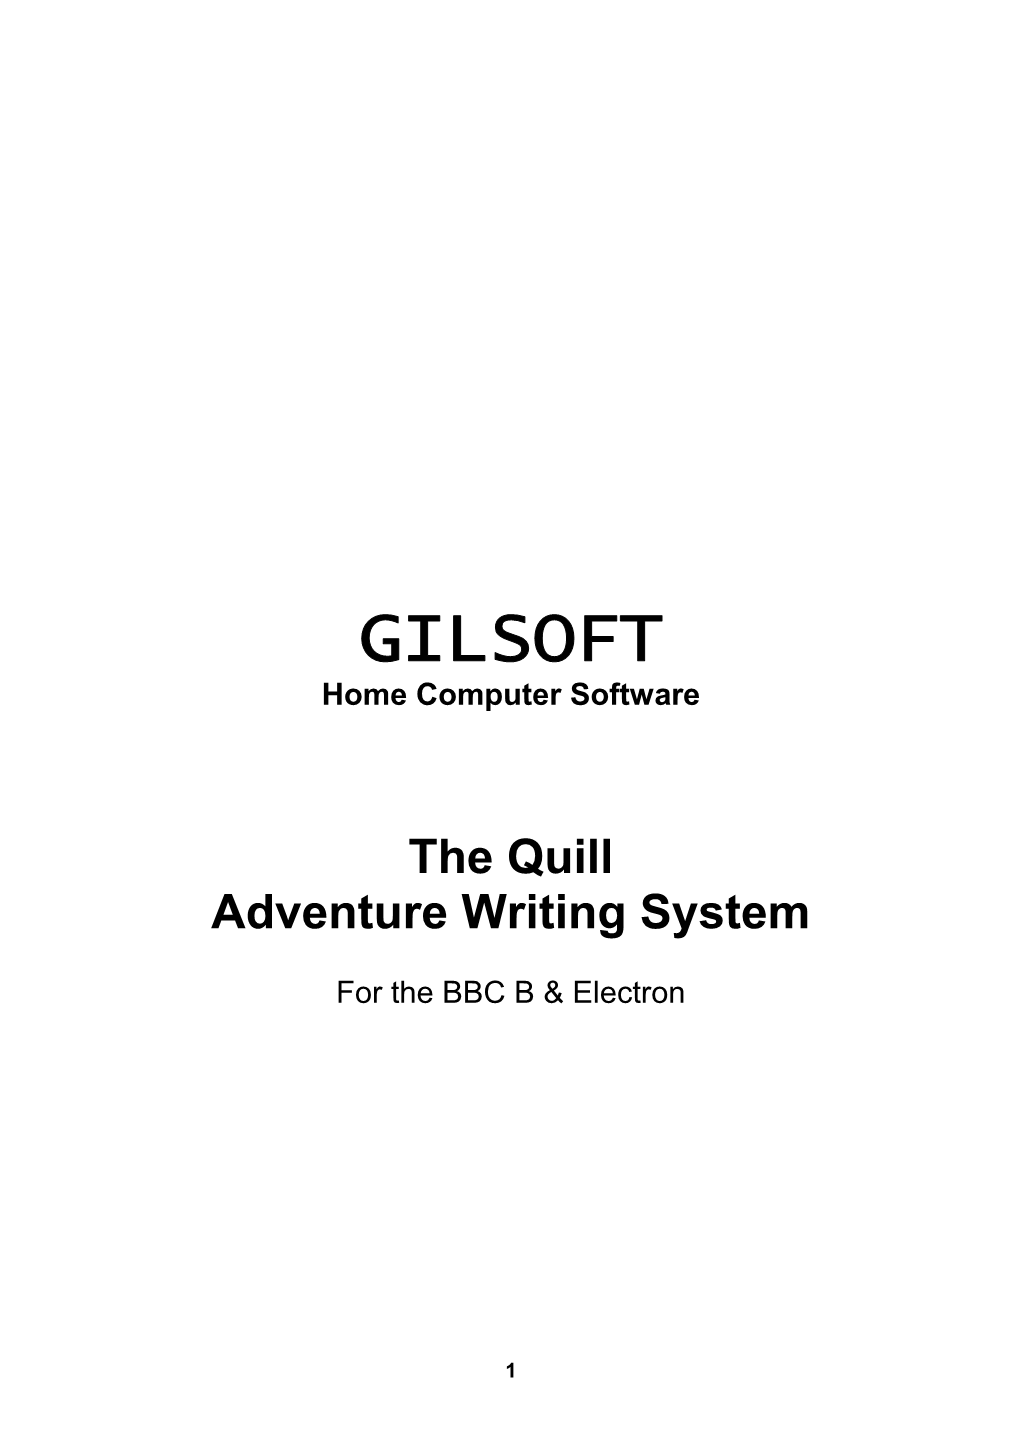 Home Computer Software